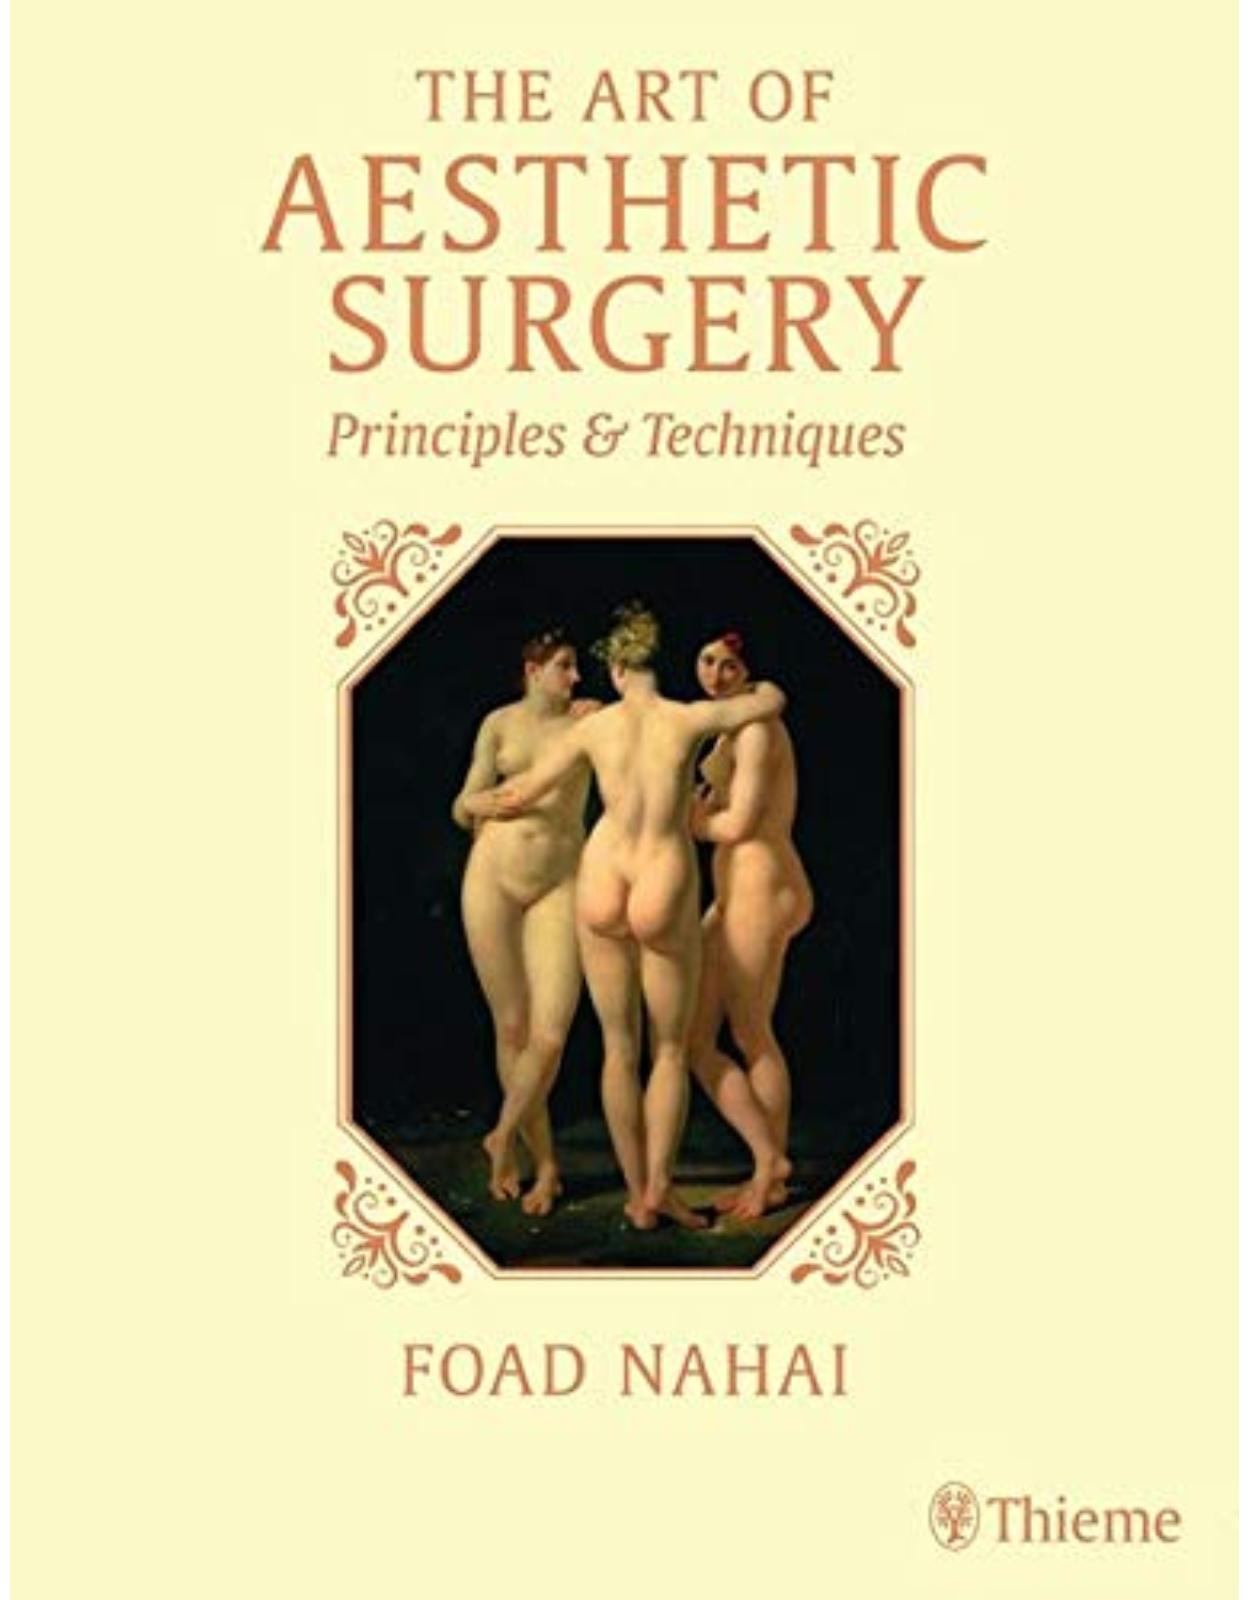 The Art of Aesthetic Surgery, Three Volume Set, Third Edition: Principles and Techniques